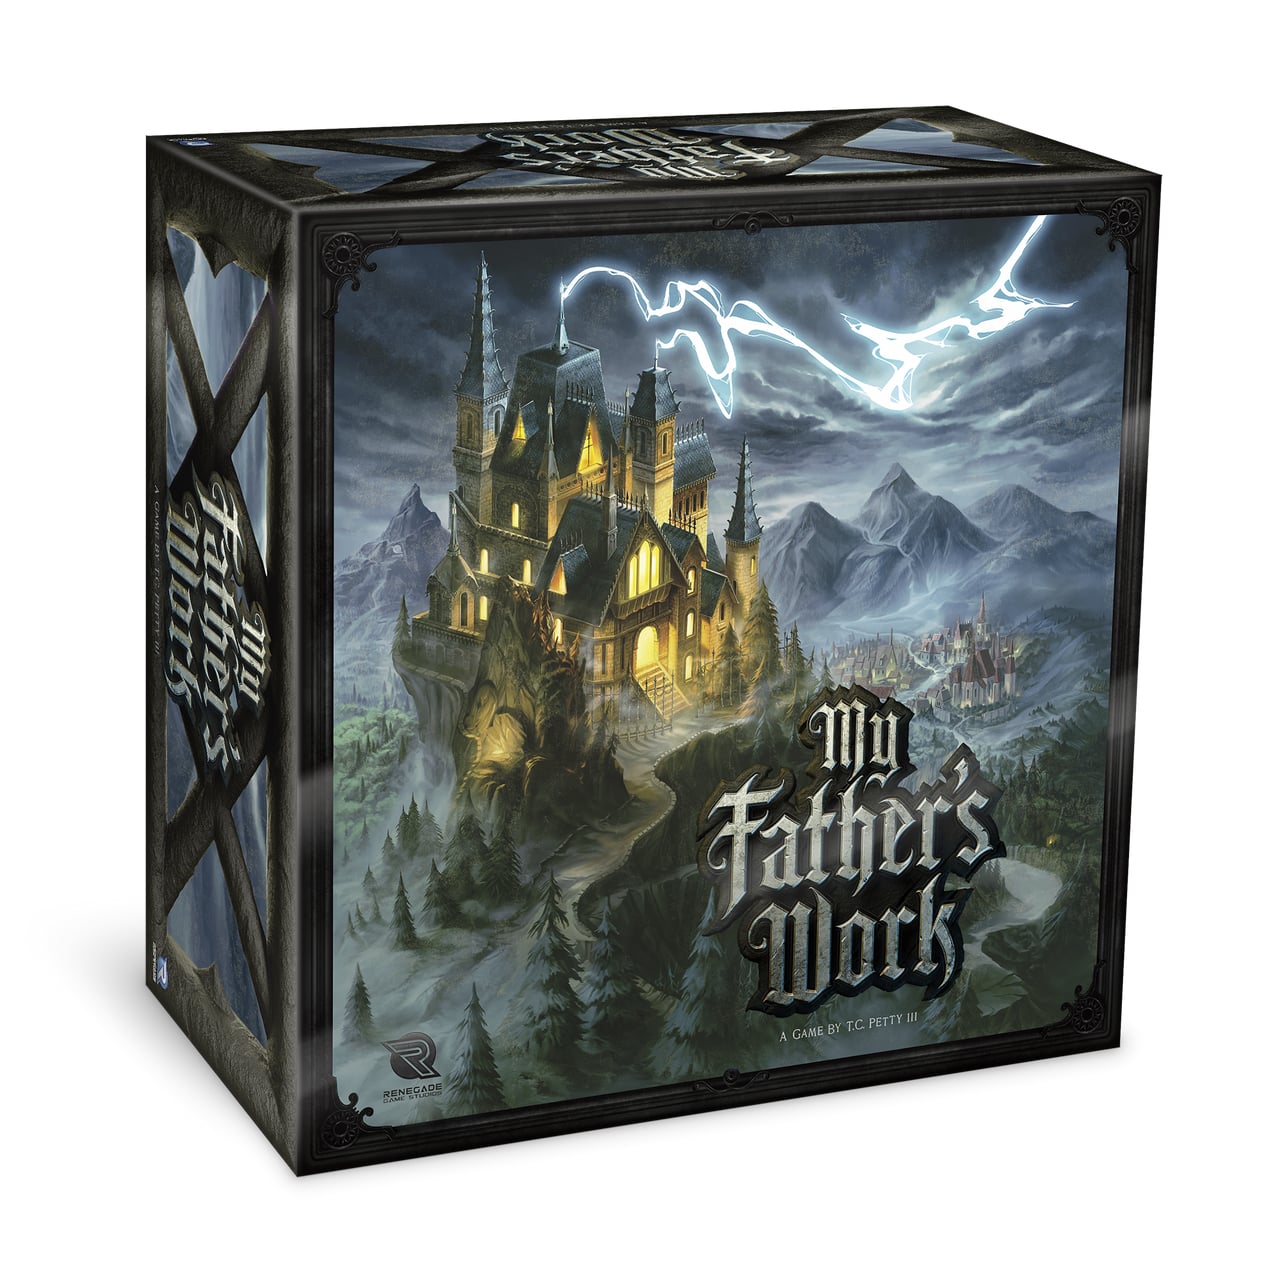 a large box for the board game 'my father's work,' which features an illustration of a forboding castle with many spires in a cold, dark, mountainous landscape, with a lightning storm raging above